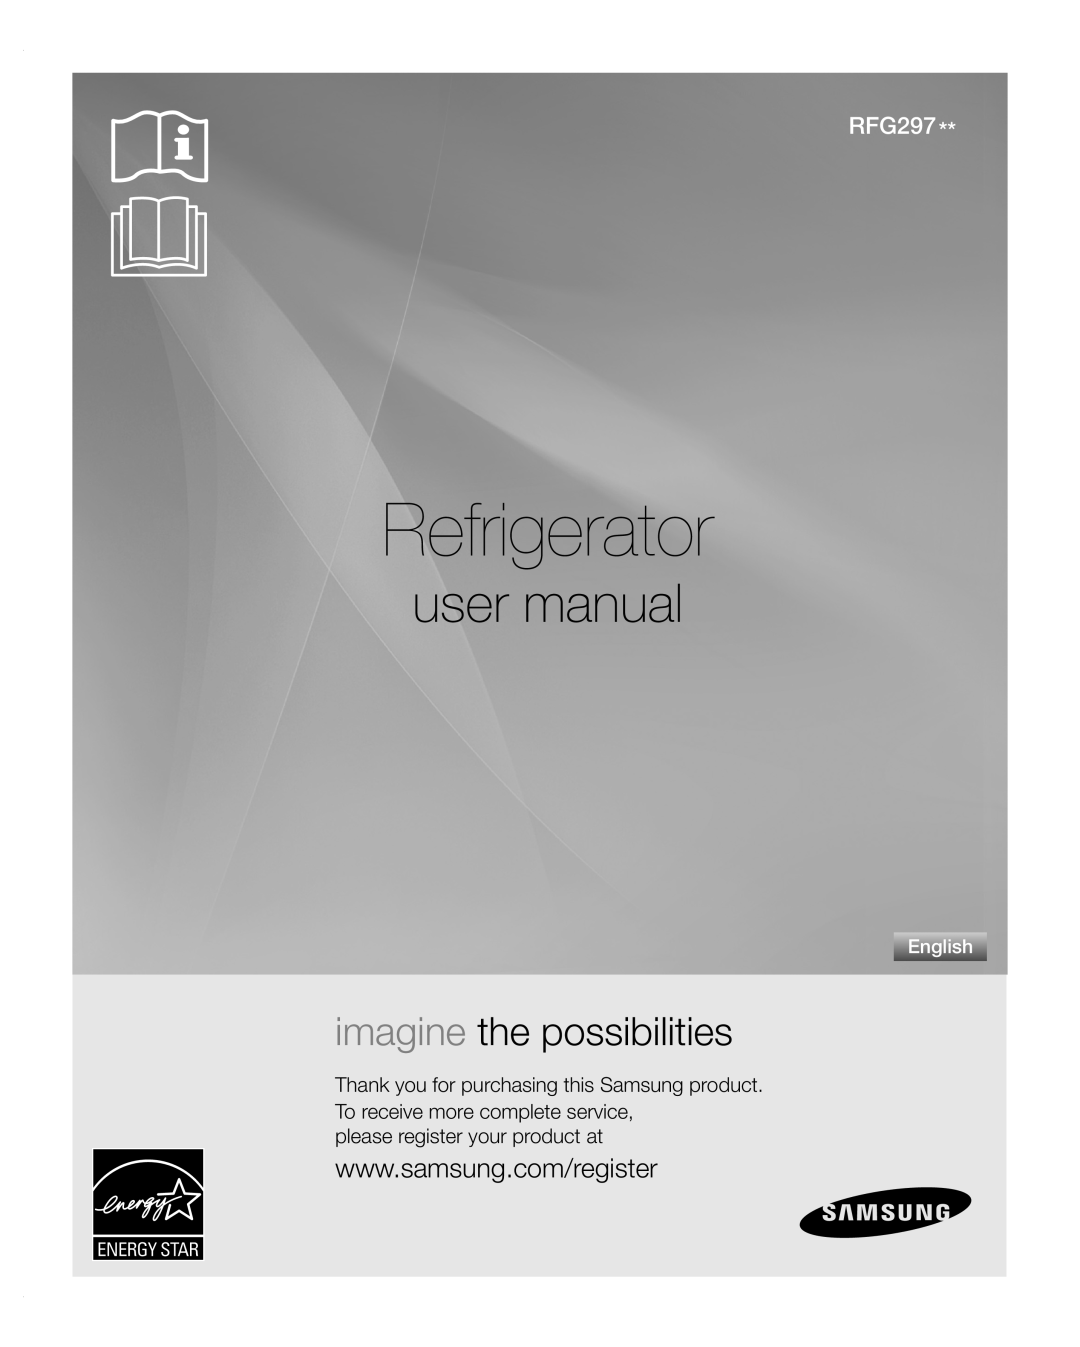 Samsung RFG297 user manual Refrigerator, imagine the possibilities, please register your product at, English 